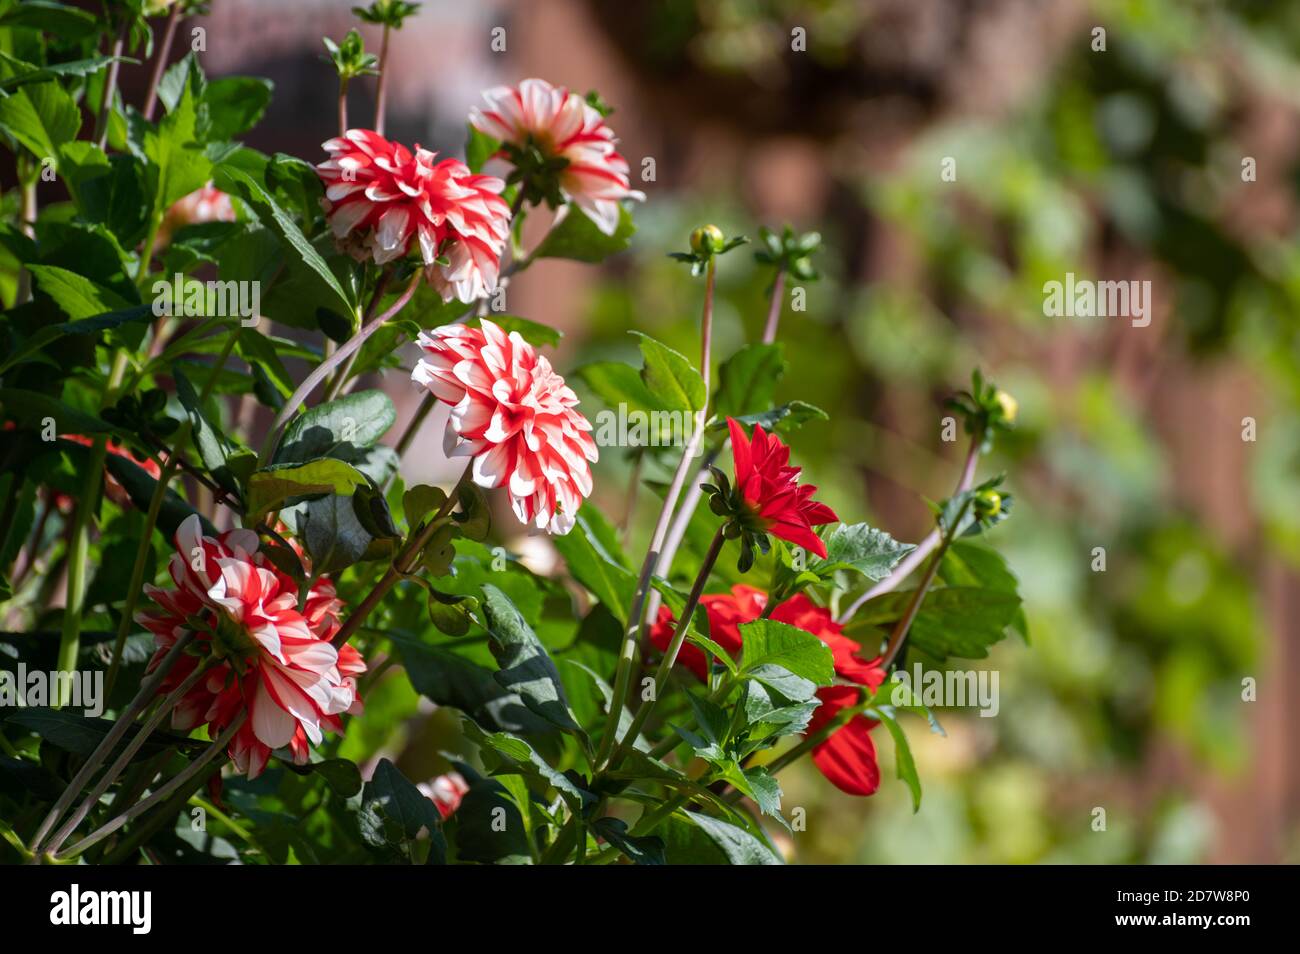 White-red dahlia flowers blossoming in garden close up Stock Photo